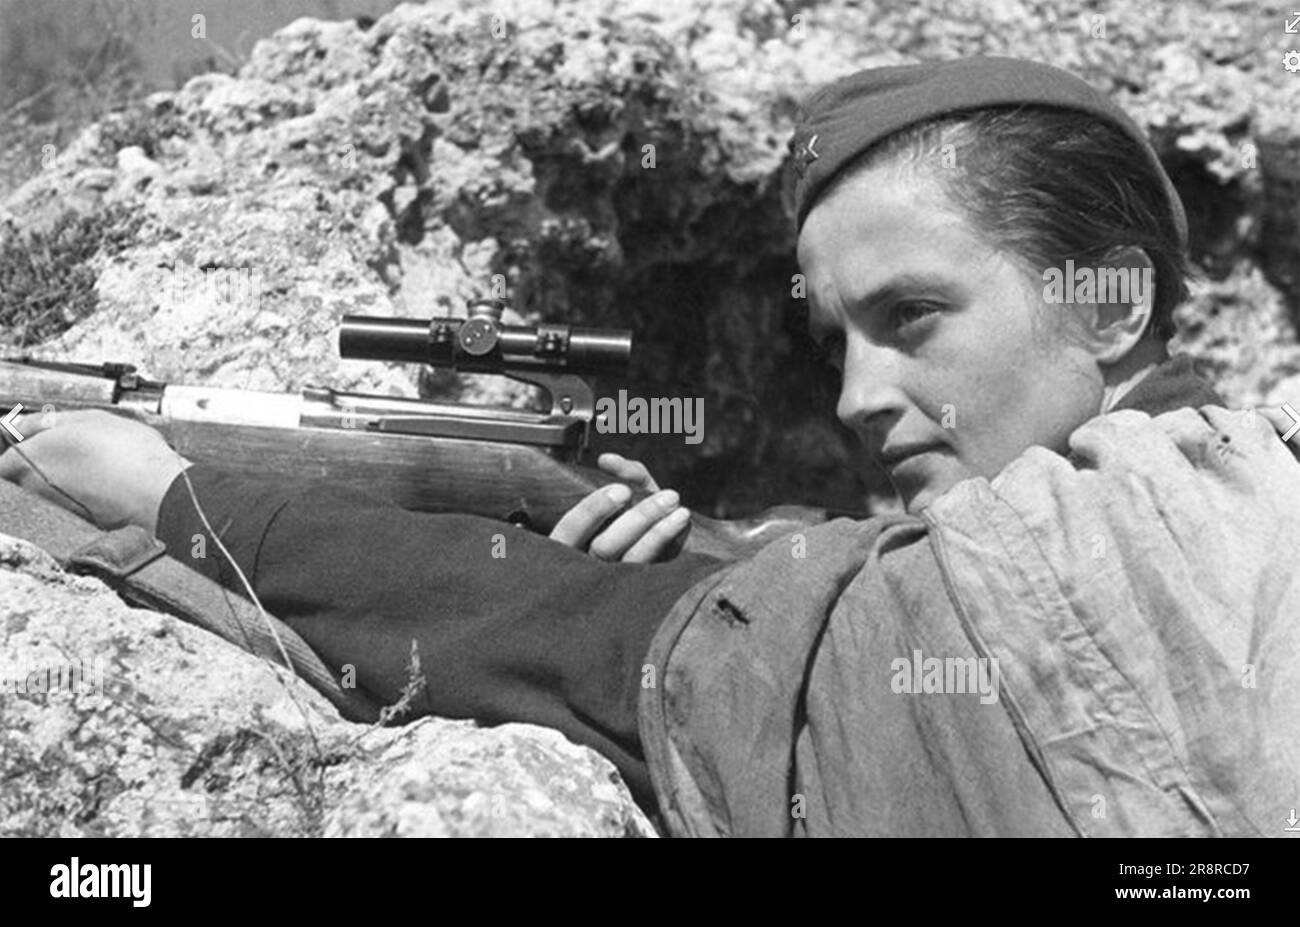 LYUDMILA PAVLICHENKO  (1916-1974) Ace Soviet sniper with the Red Army photographed about 1942. Photo: SIB Stock Photo